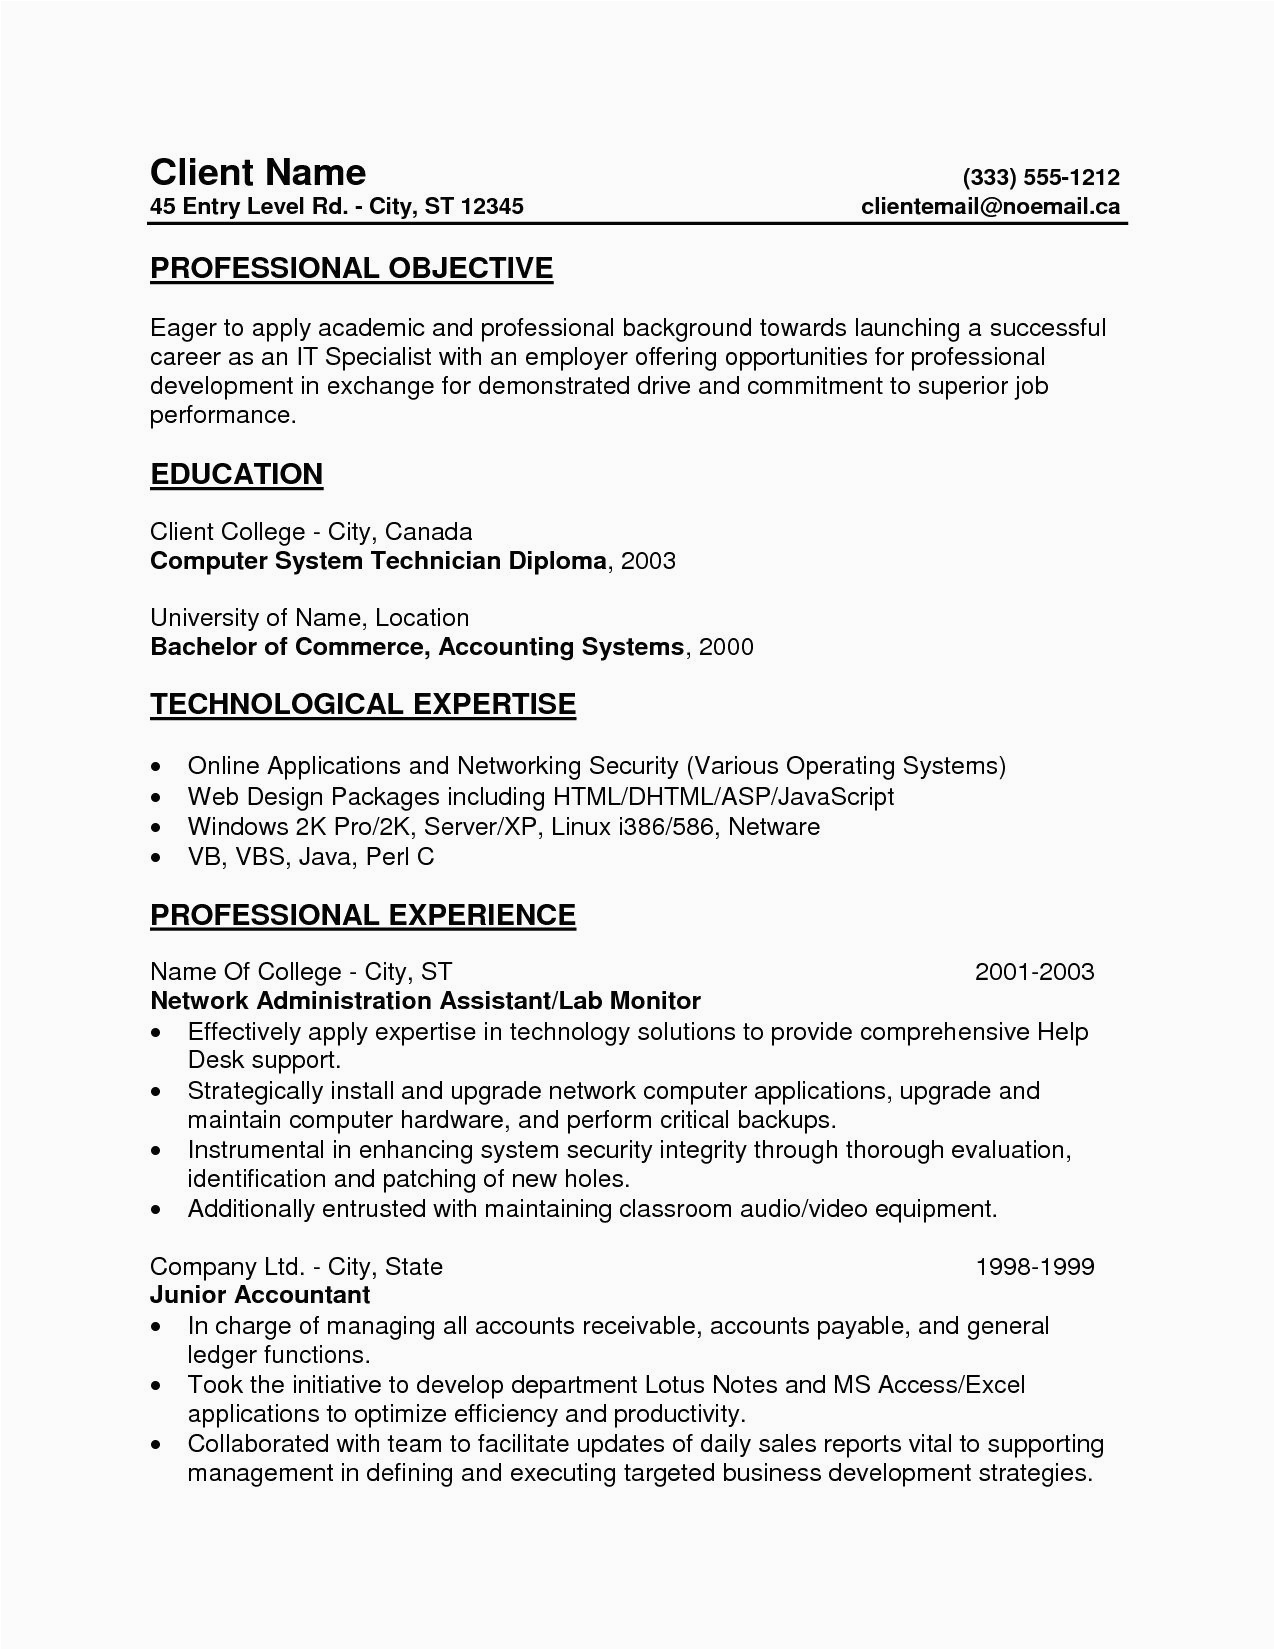 Entry Level Job Resume Objective Samples Entry Level Fice assistant Resume Unique Free Entry Level Resumes Sam